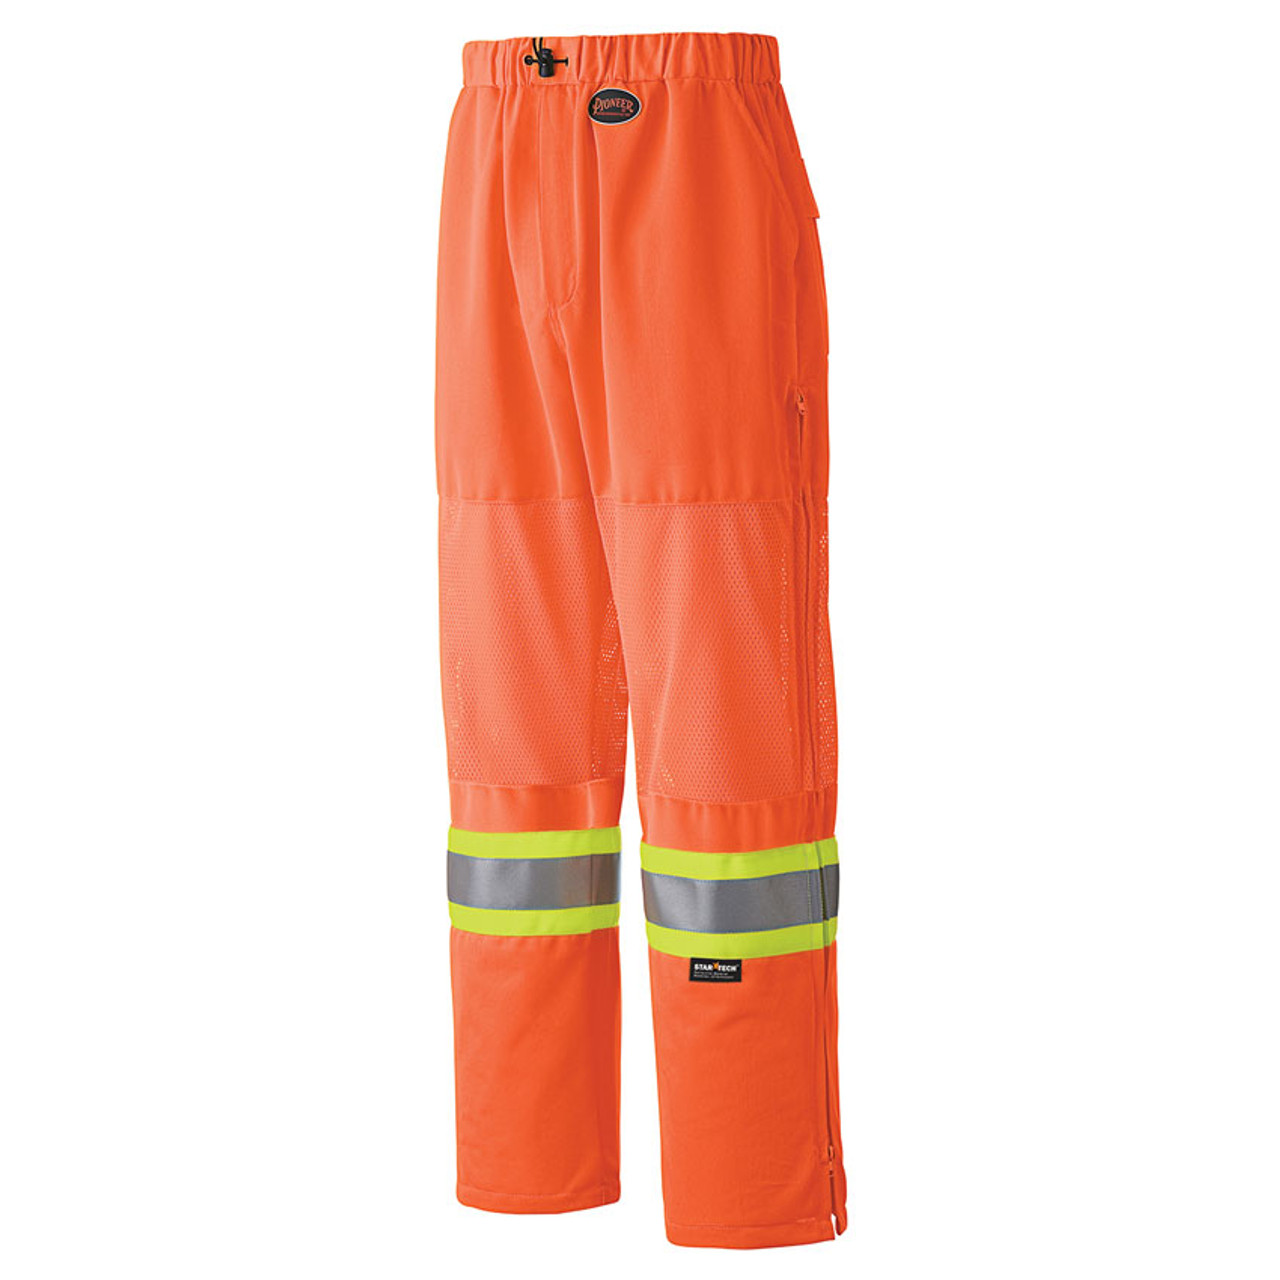 https://cdn11.bigcommerce.com/s-4208f/images/stencil/1280x1280/products/7361/8708/Hi-Vis-Traffic-Safety-Pant-with-Mesh-CSA-Class-3-Pioneer-6001P__87181.1675721097.jpg?c=2